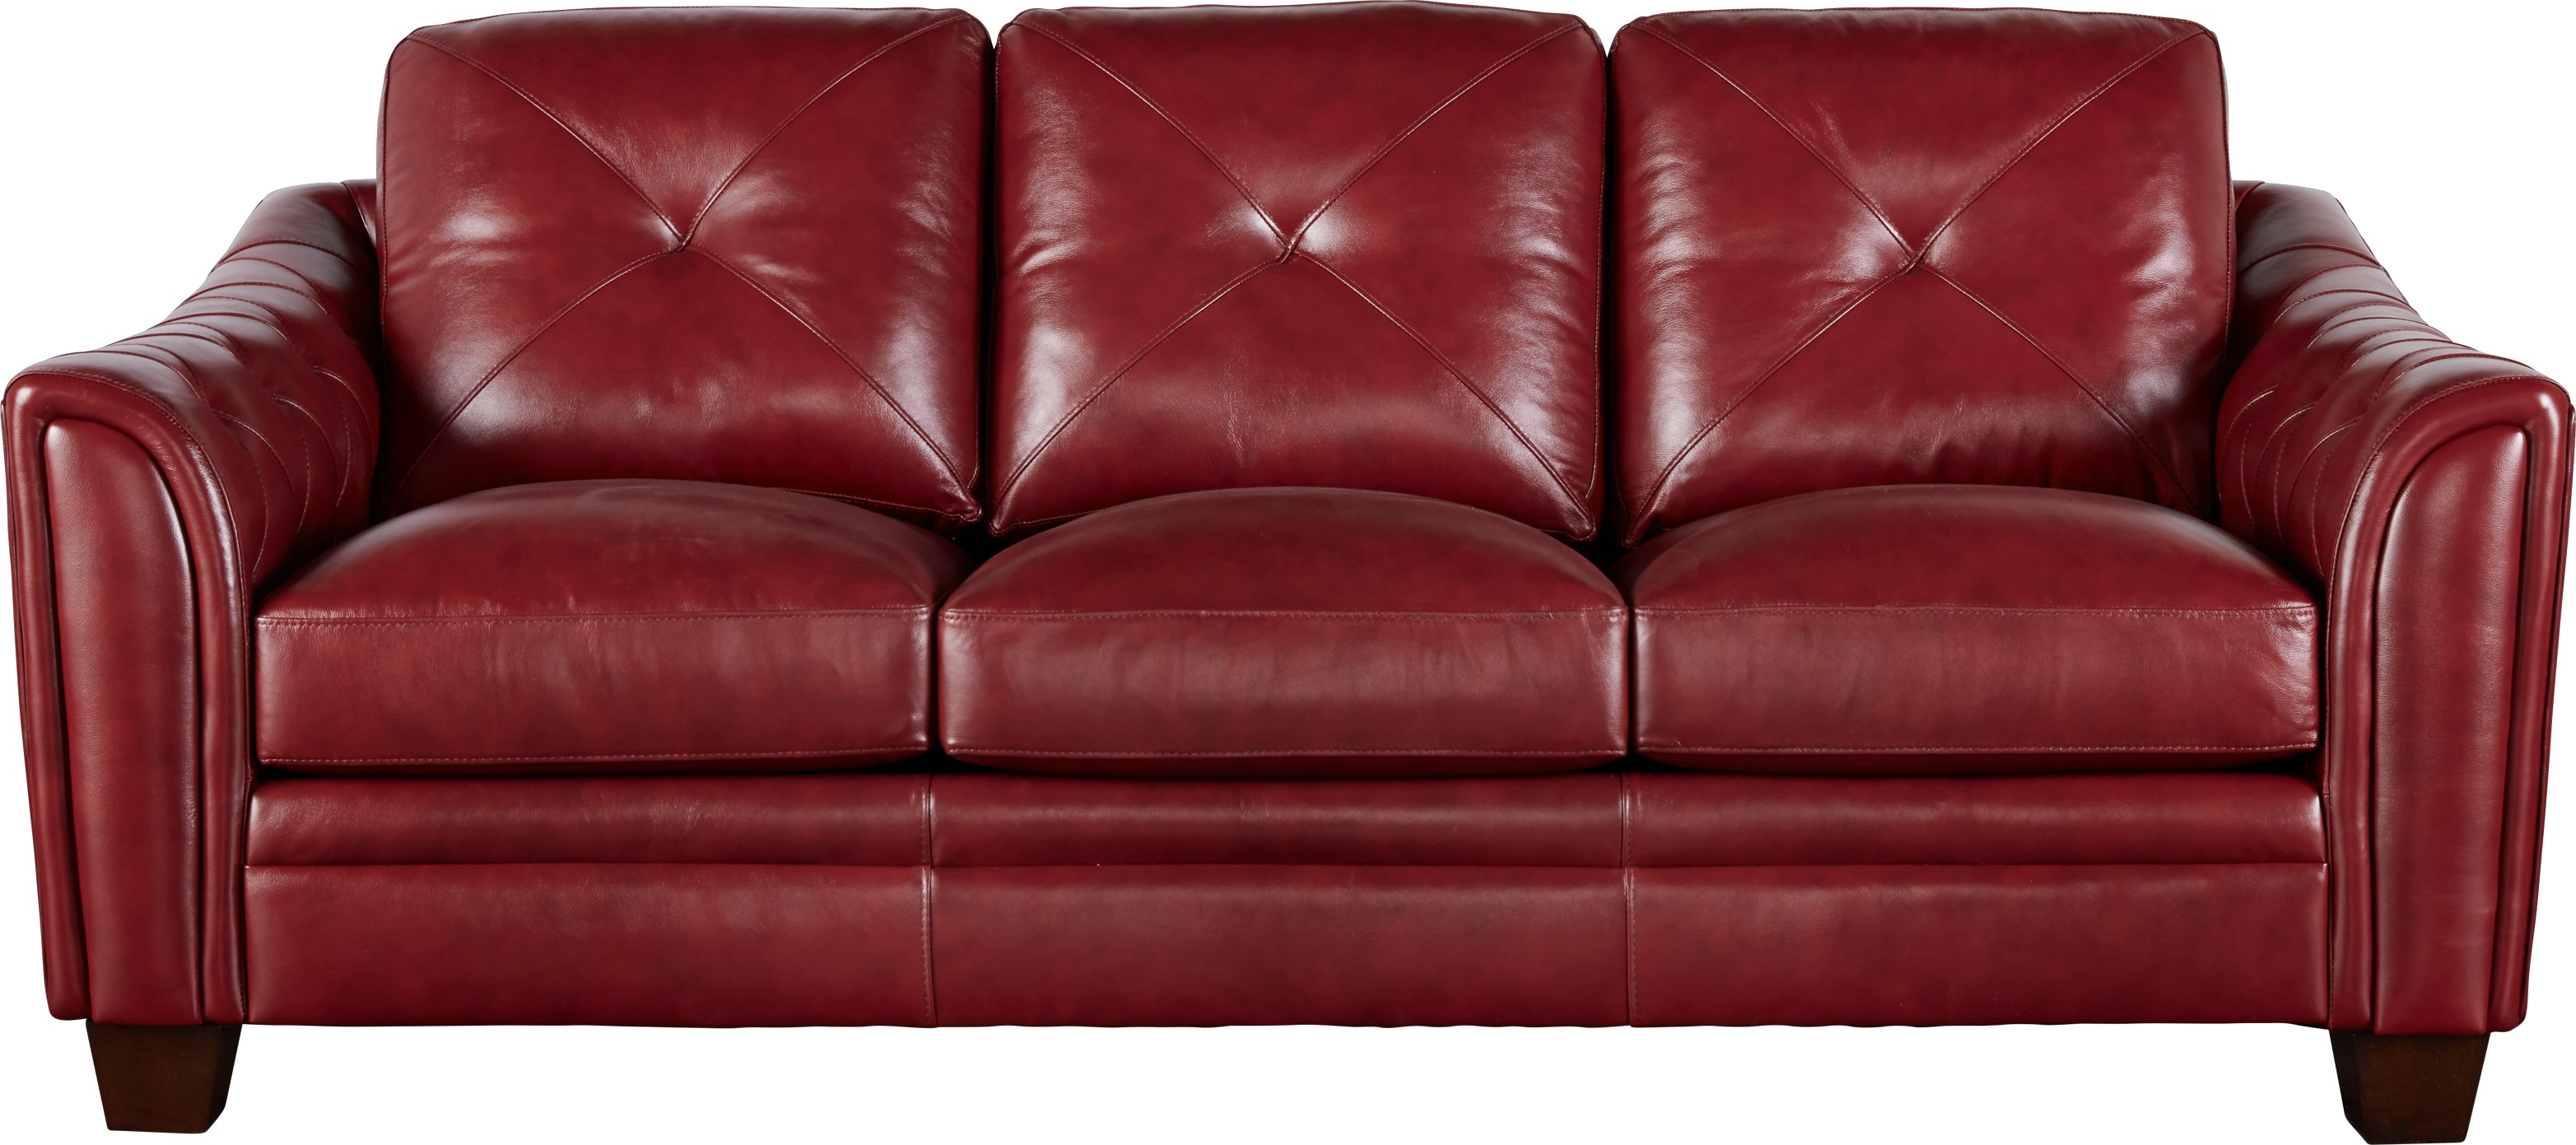 cheapest red leather sofa